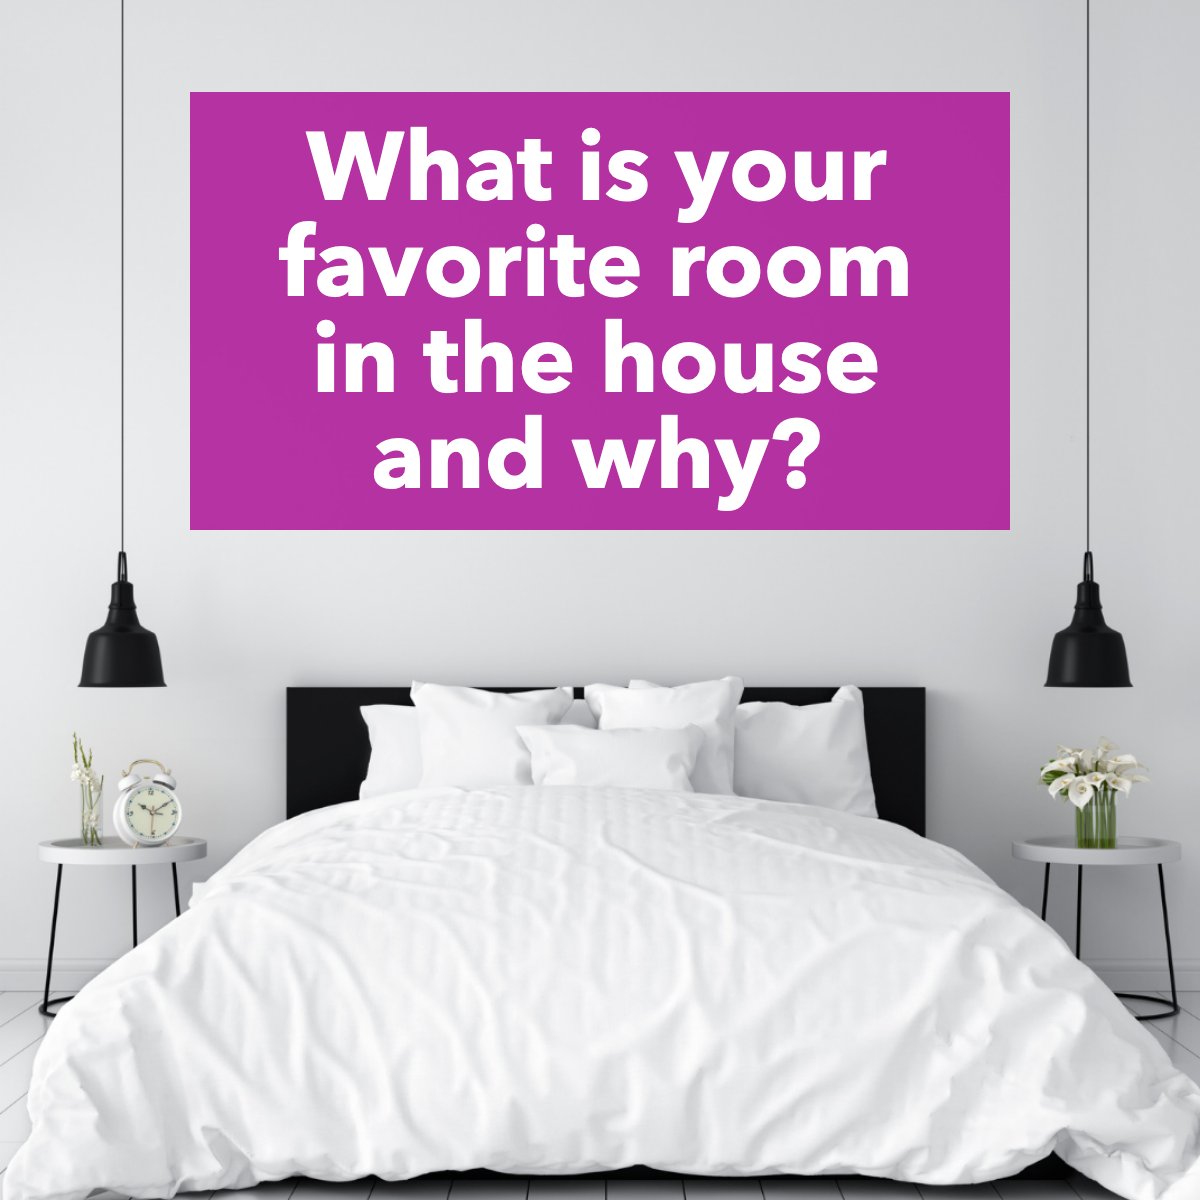 We all have our favorite room, tell us which one is yours. ✨🏘

#favoriteroominthehouse #myfavoriteroom #homesweethome
 #mainerealestate #homesforsale #floridarealestate #selleragent #buyeragent #listingagent #homeimprovements #mainerealestatecompany #mainerealtor